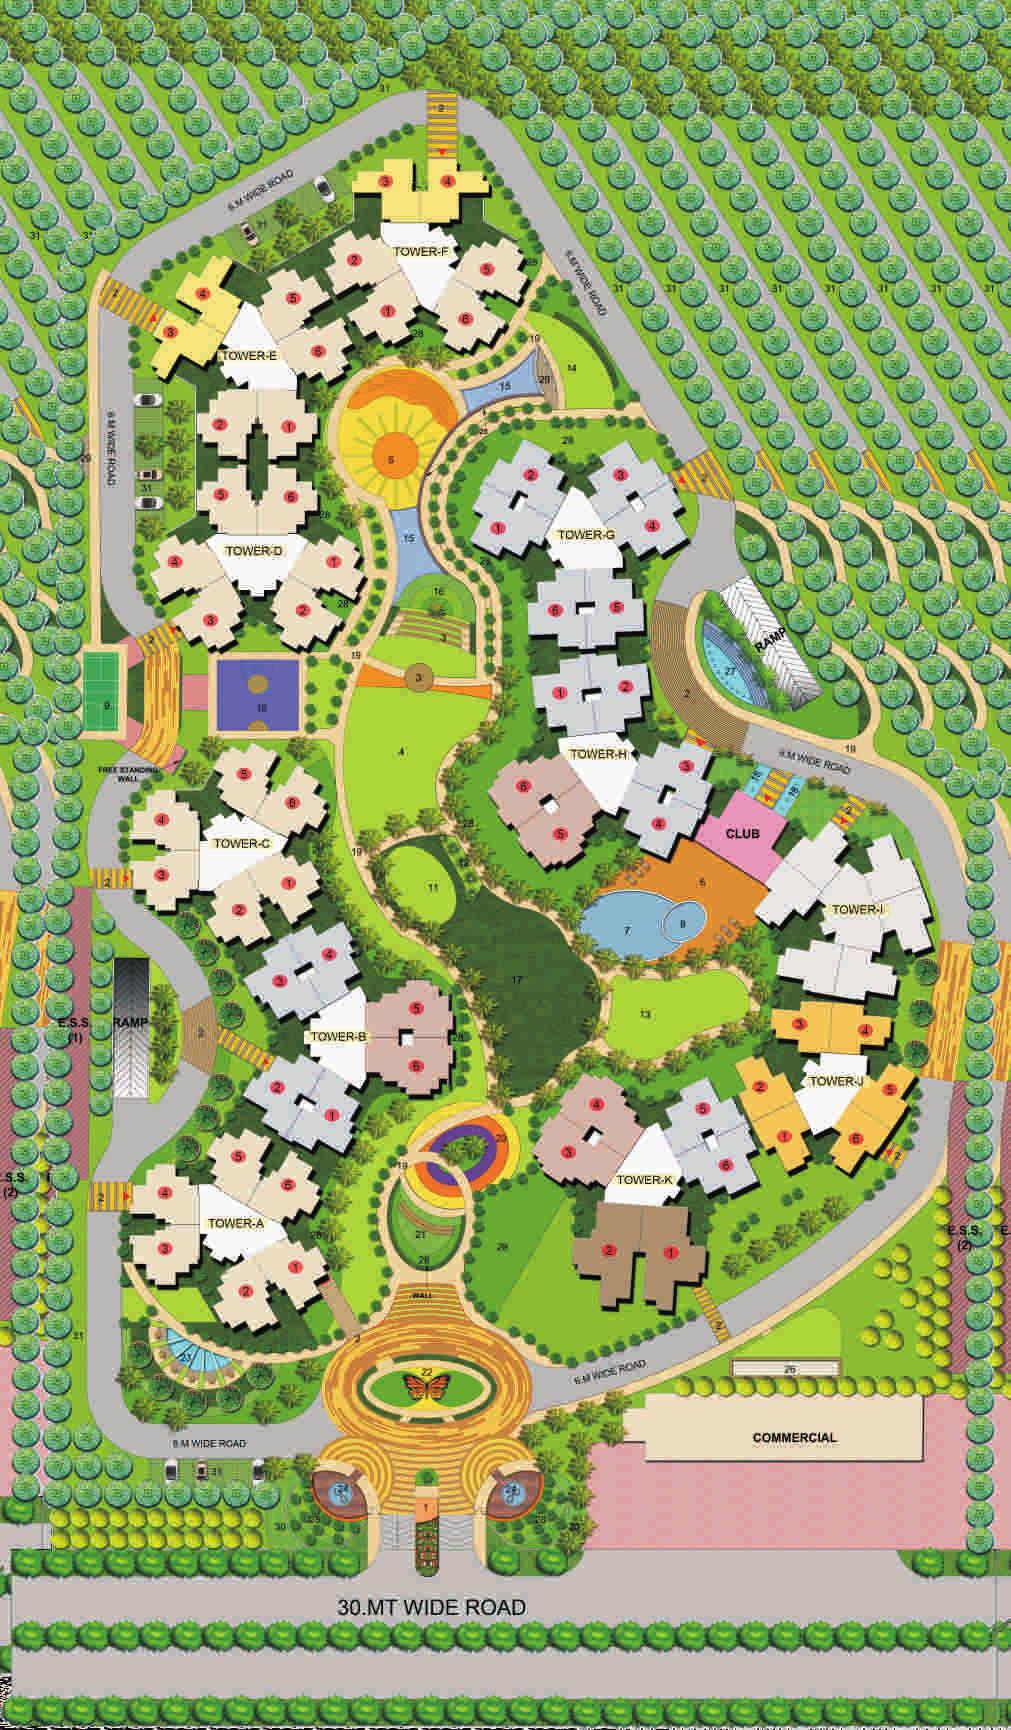 LEGEND SITE PLAN 1. Guard Room and Entrance 11. Bamboo Groove Gate 12. Senior Citizens Garden 2. Tower Entries 13. Sheet Fall 3. Amphitheater 14. Jogging Track 4. Public Lawn 15. Flower Bed 5.